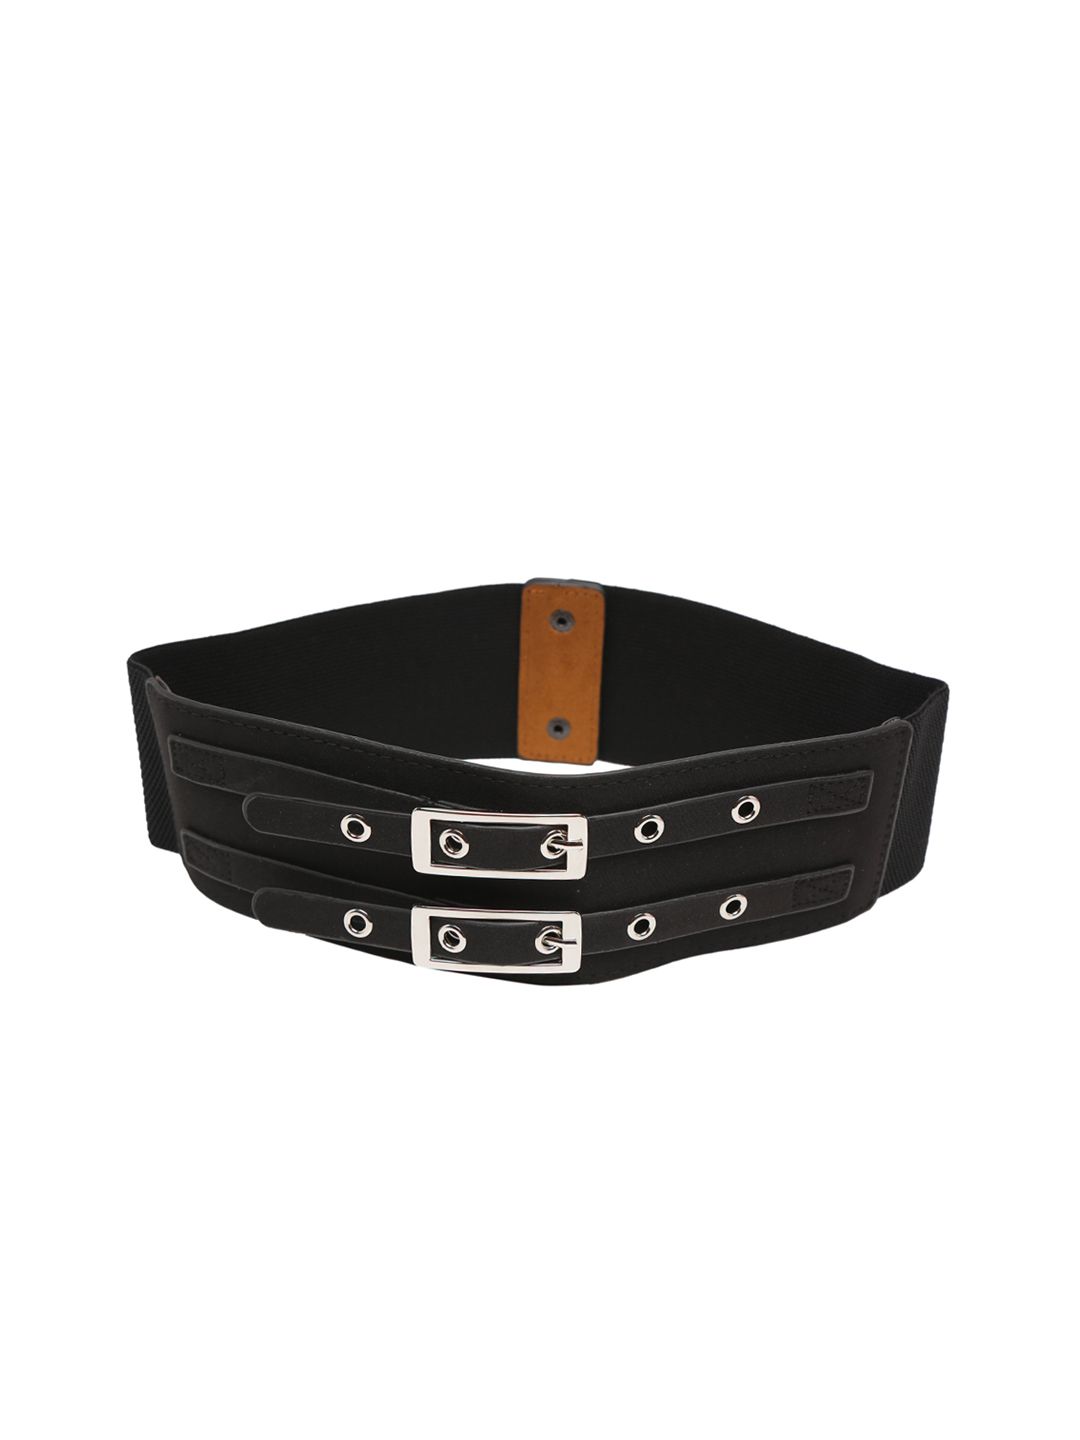 Mali Fionna Women Black Solid Cinched Waist Belt Price in India